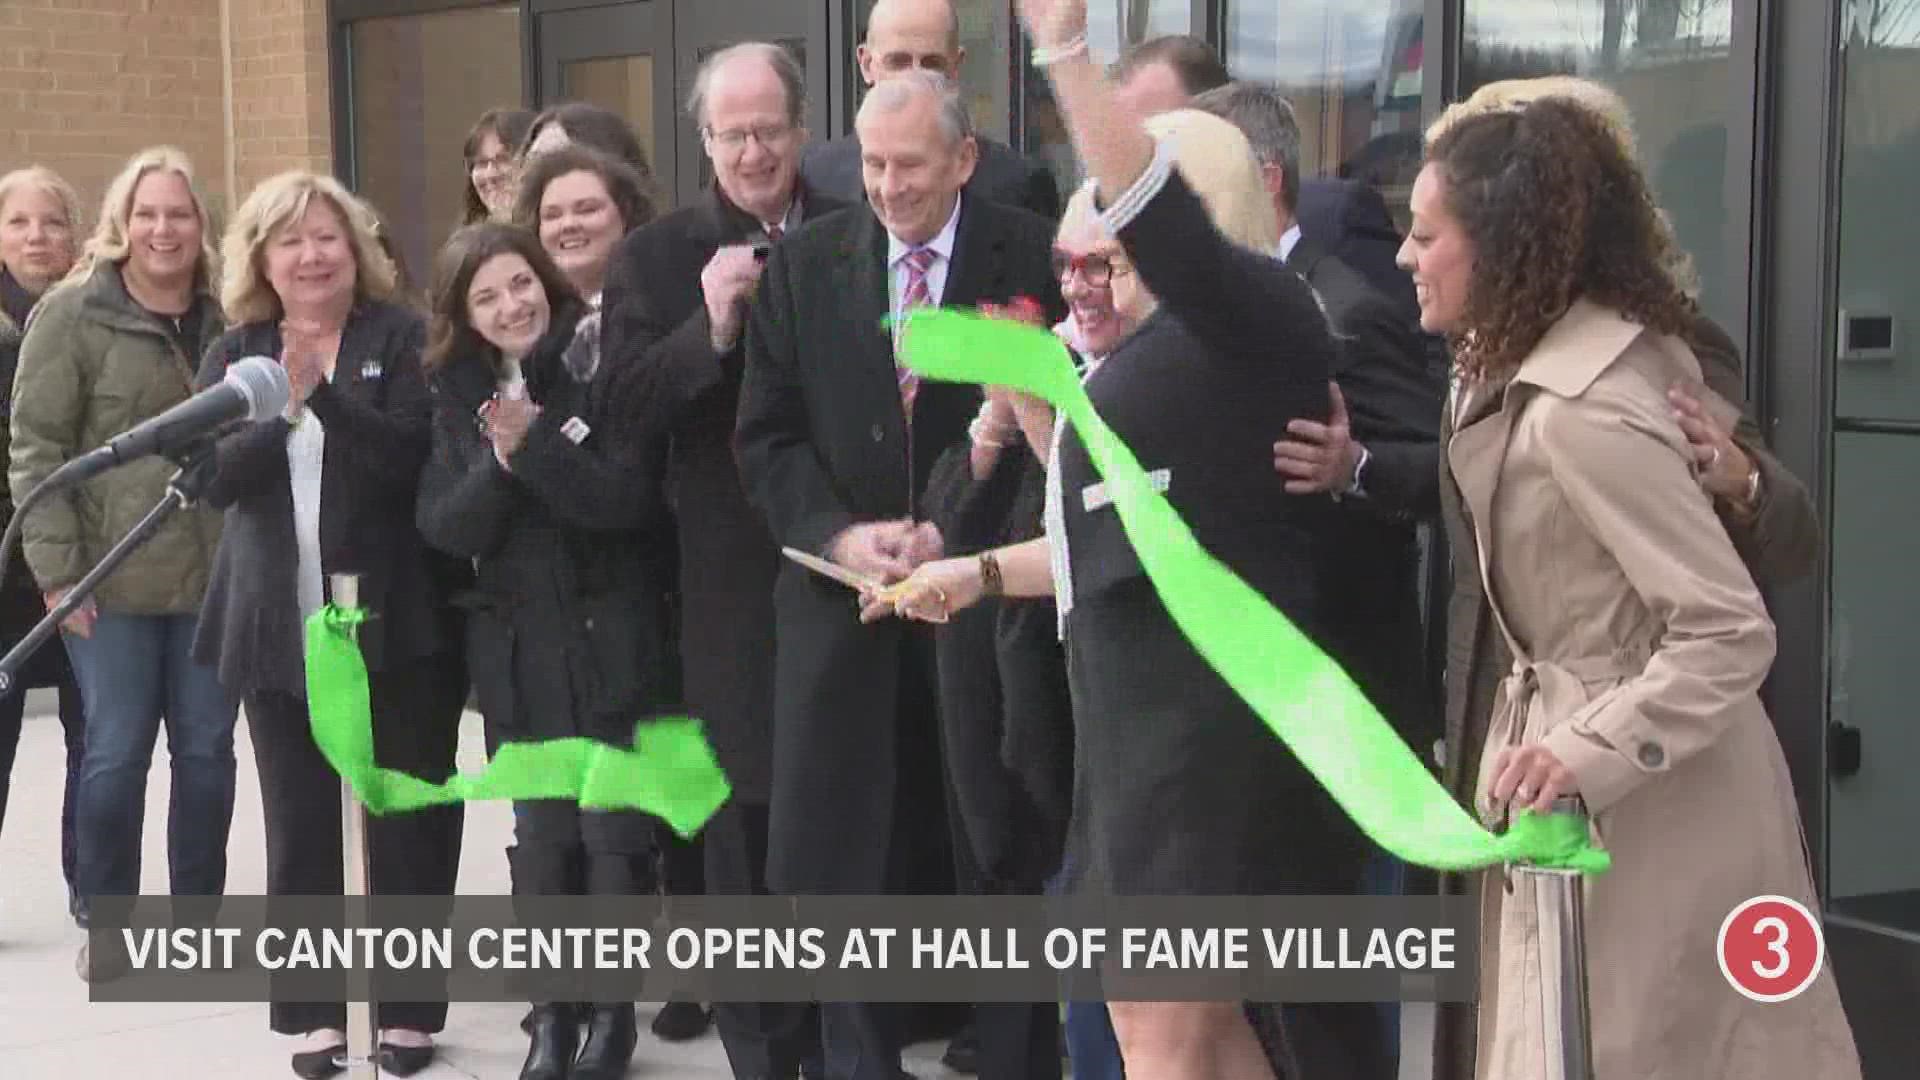 The Visit Canton Welcome Center held a ribbon-cutting ceremony at the Hall of Fame Village on Friday.